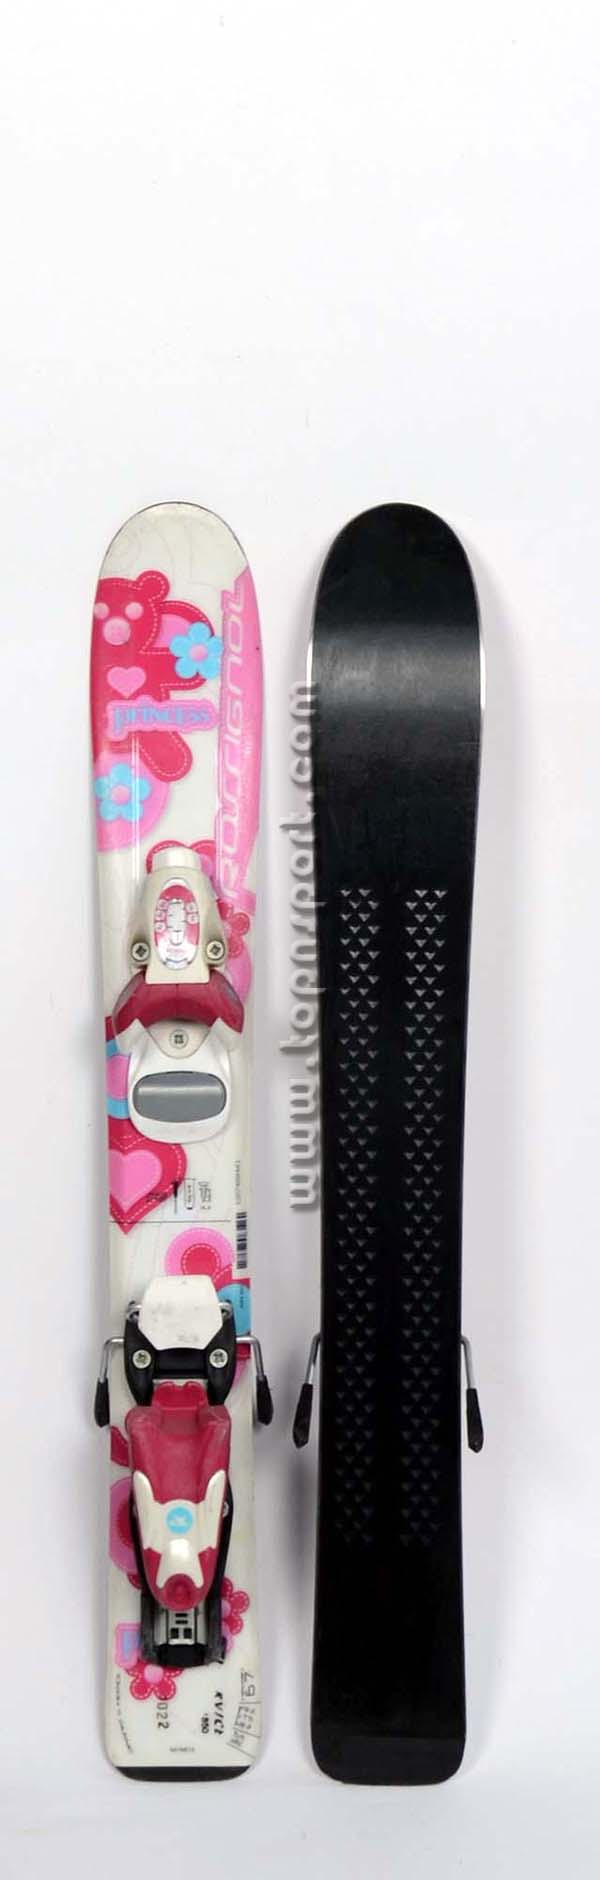 Rossignol Princess - Skis d'occasion Fille